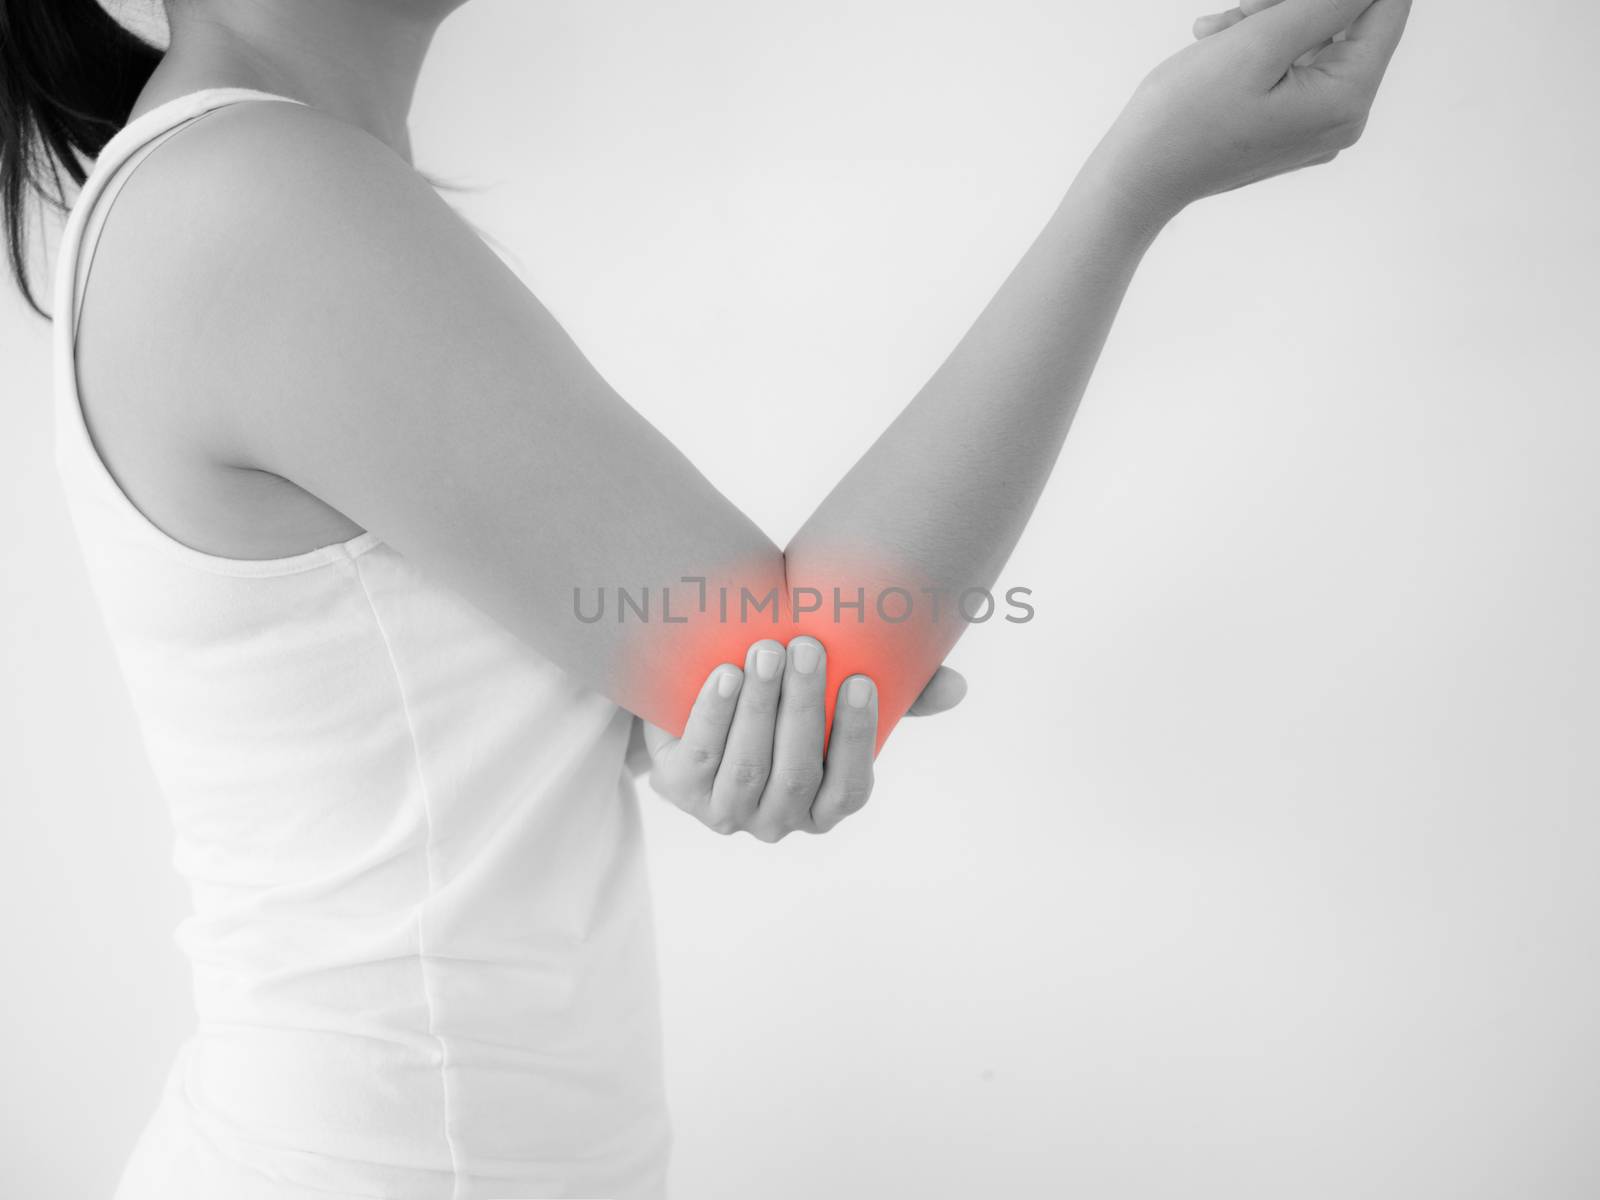 Close up woman having pain in injured elbow. Health care and arm pain concept.